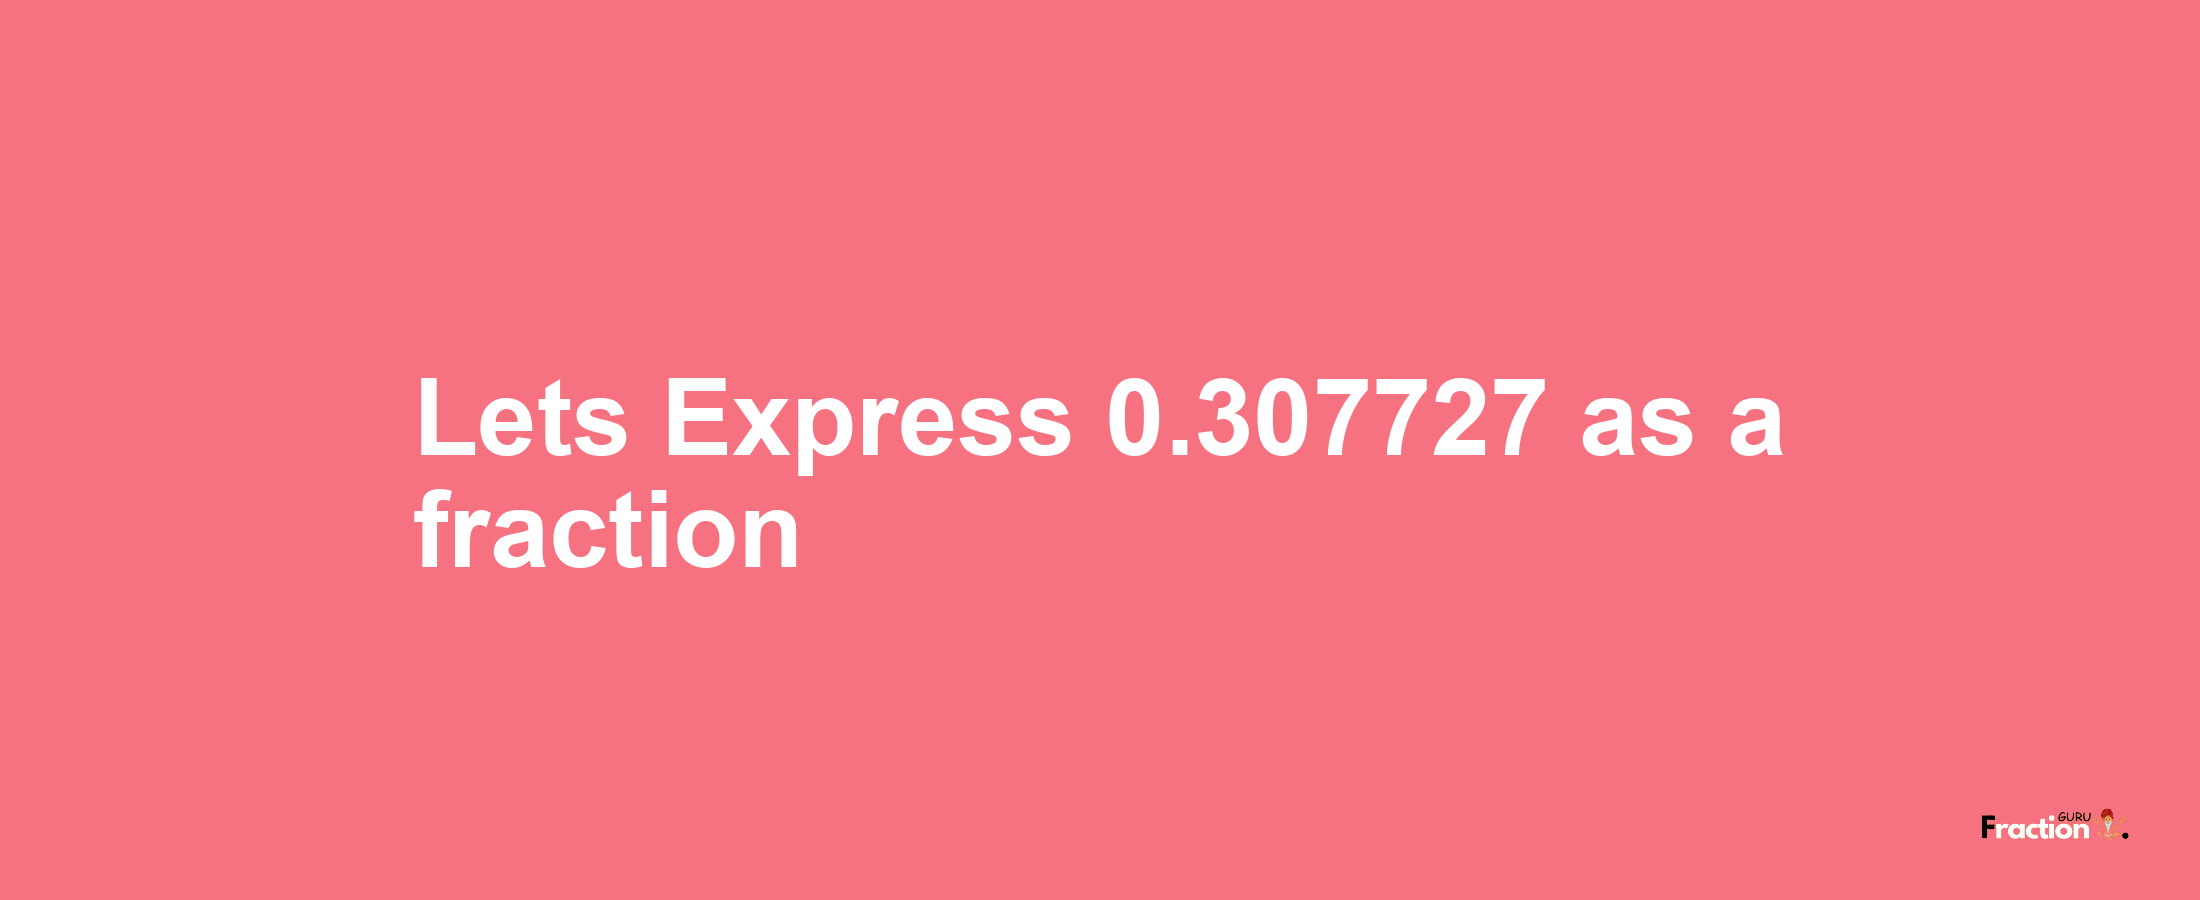 Lets Express 0.307727 as afraction